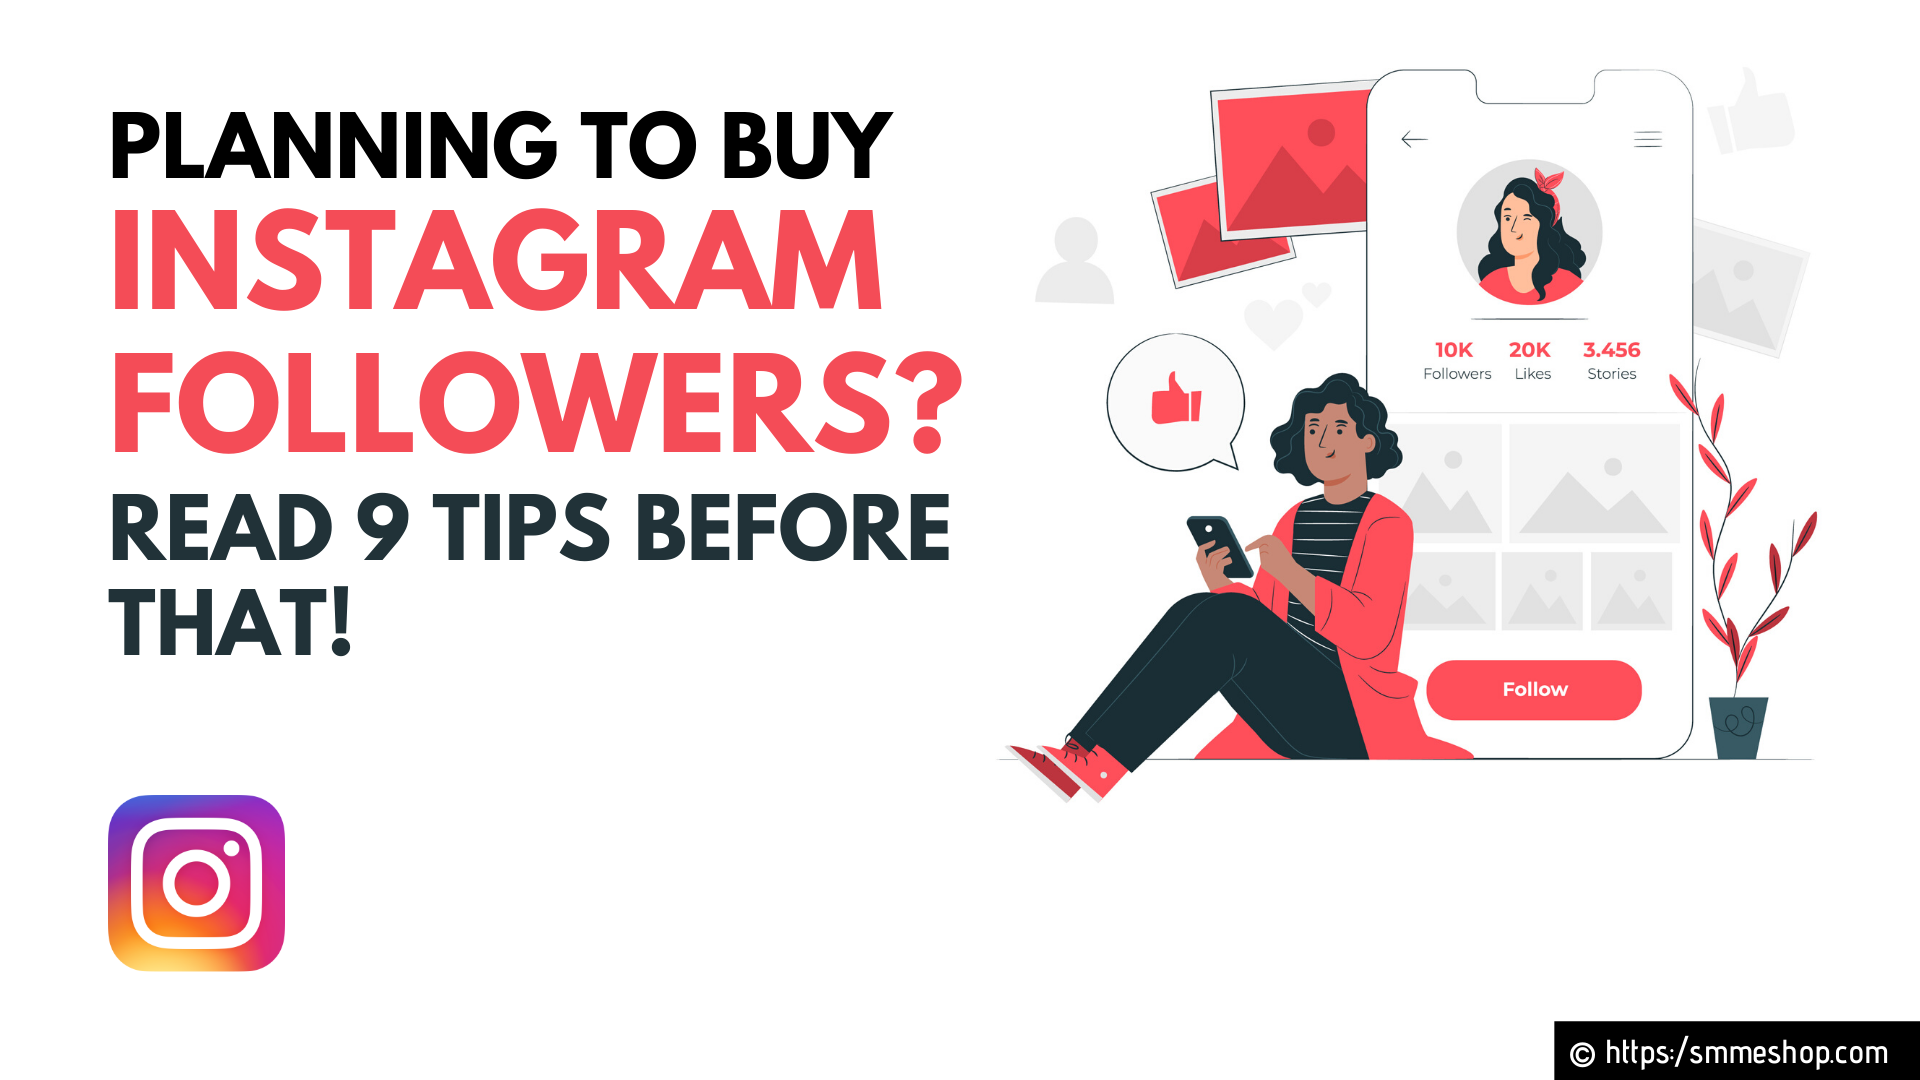 Planning to Buy Instagram Followers? Read our 9 Tips Before that!